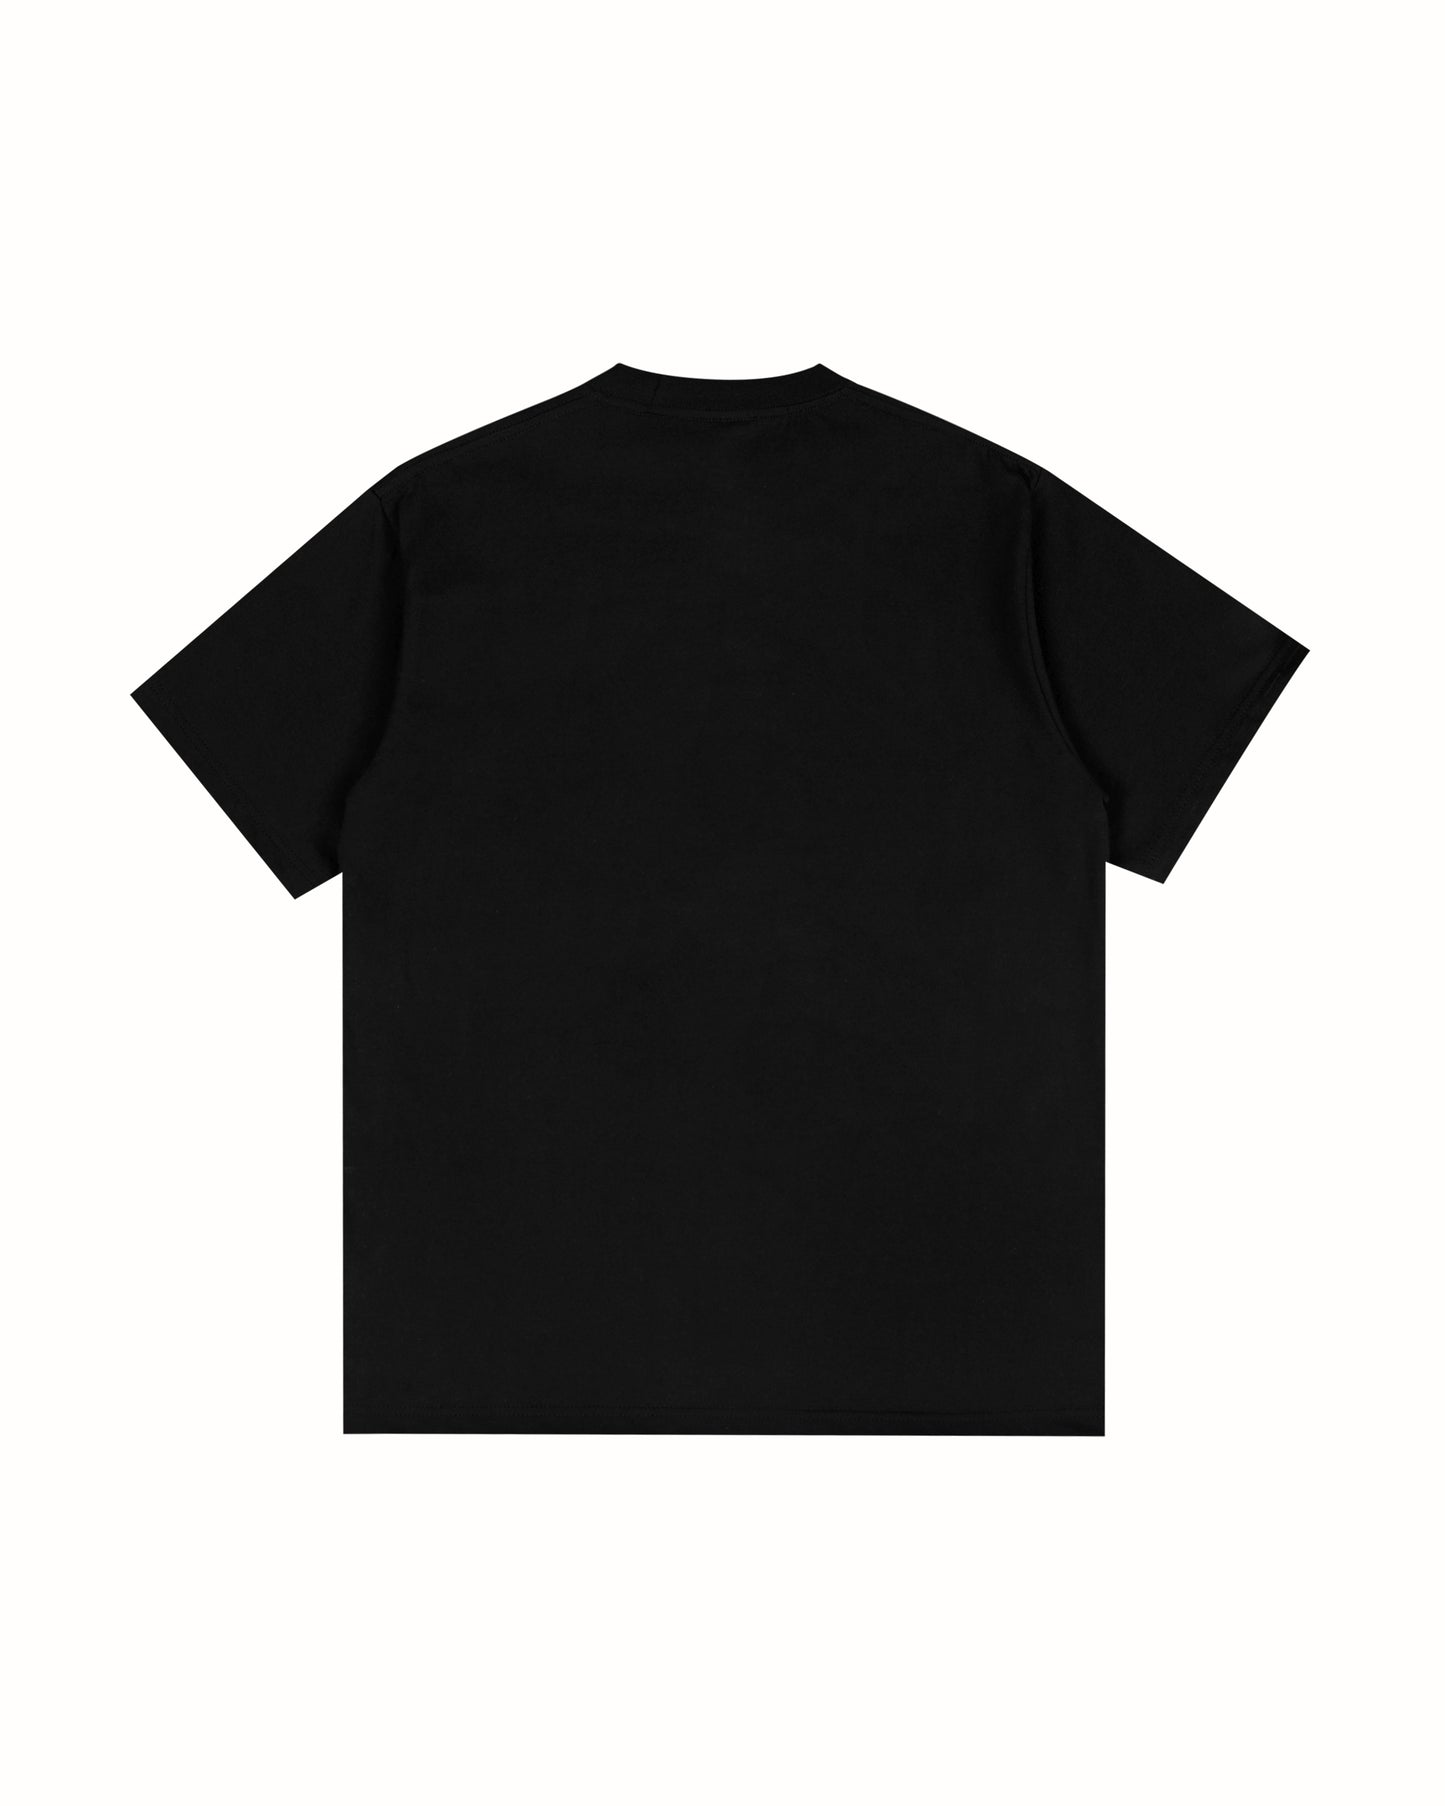 Gema Black Relaxed Fit Tees